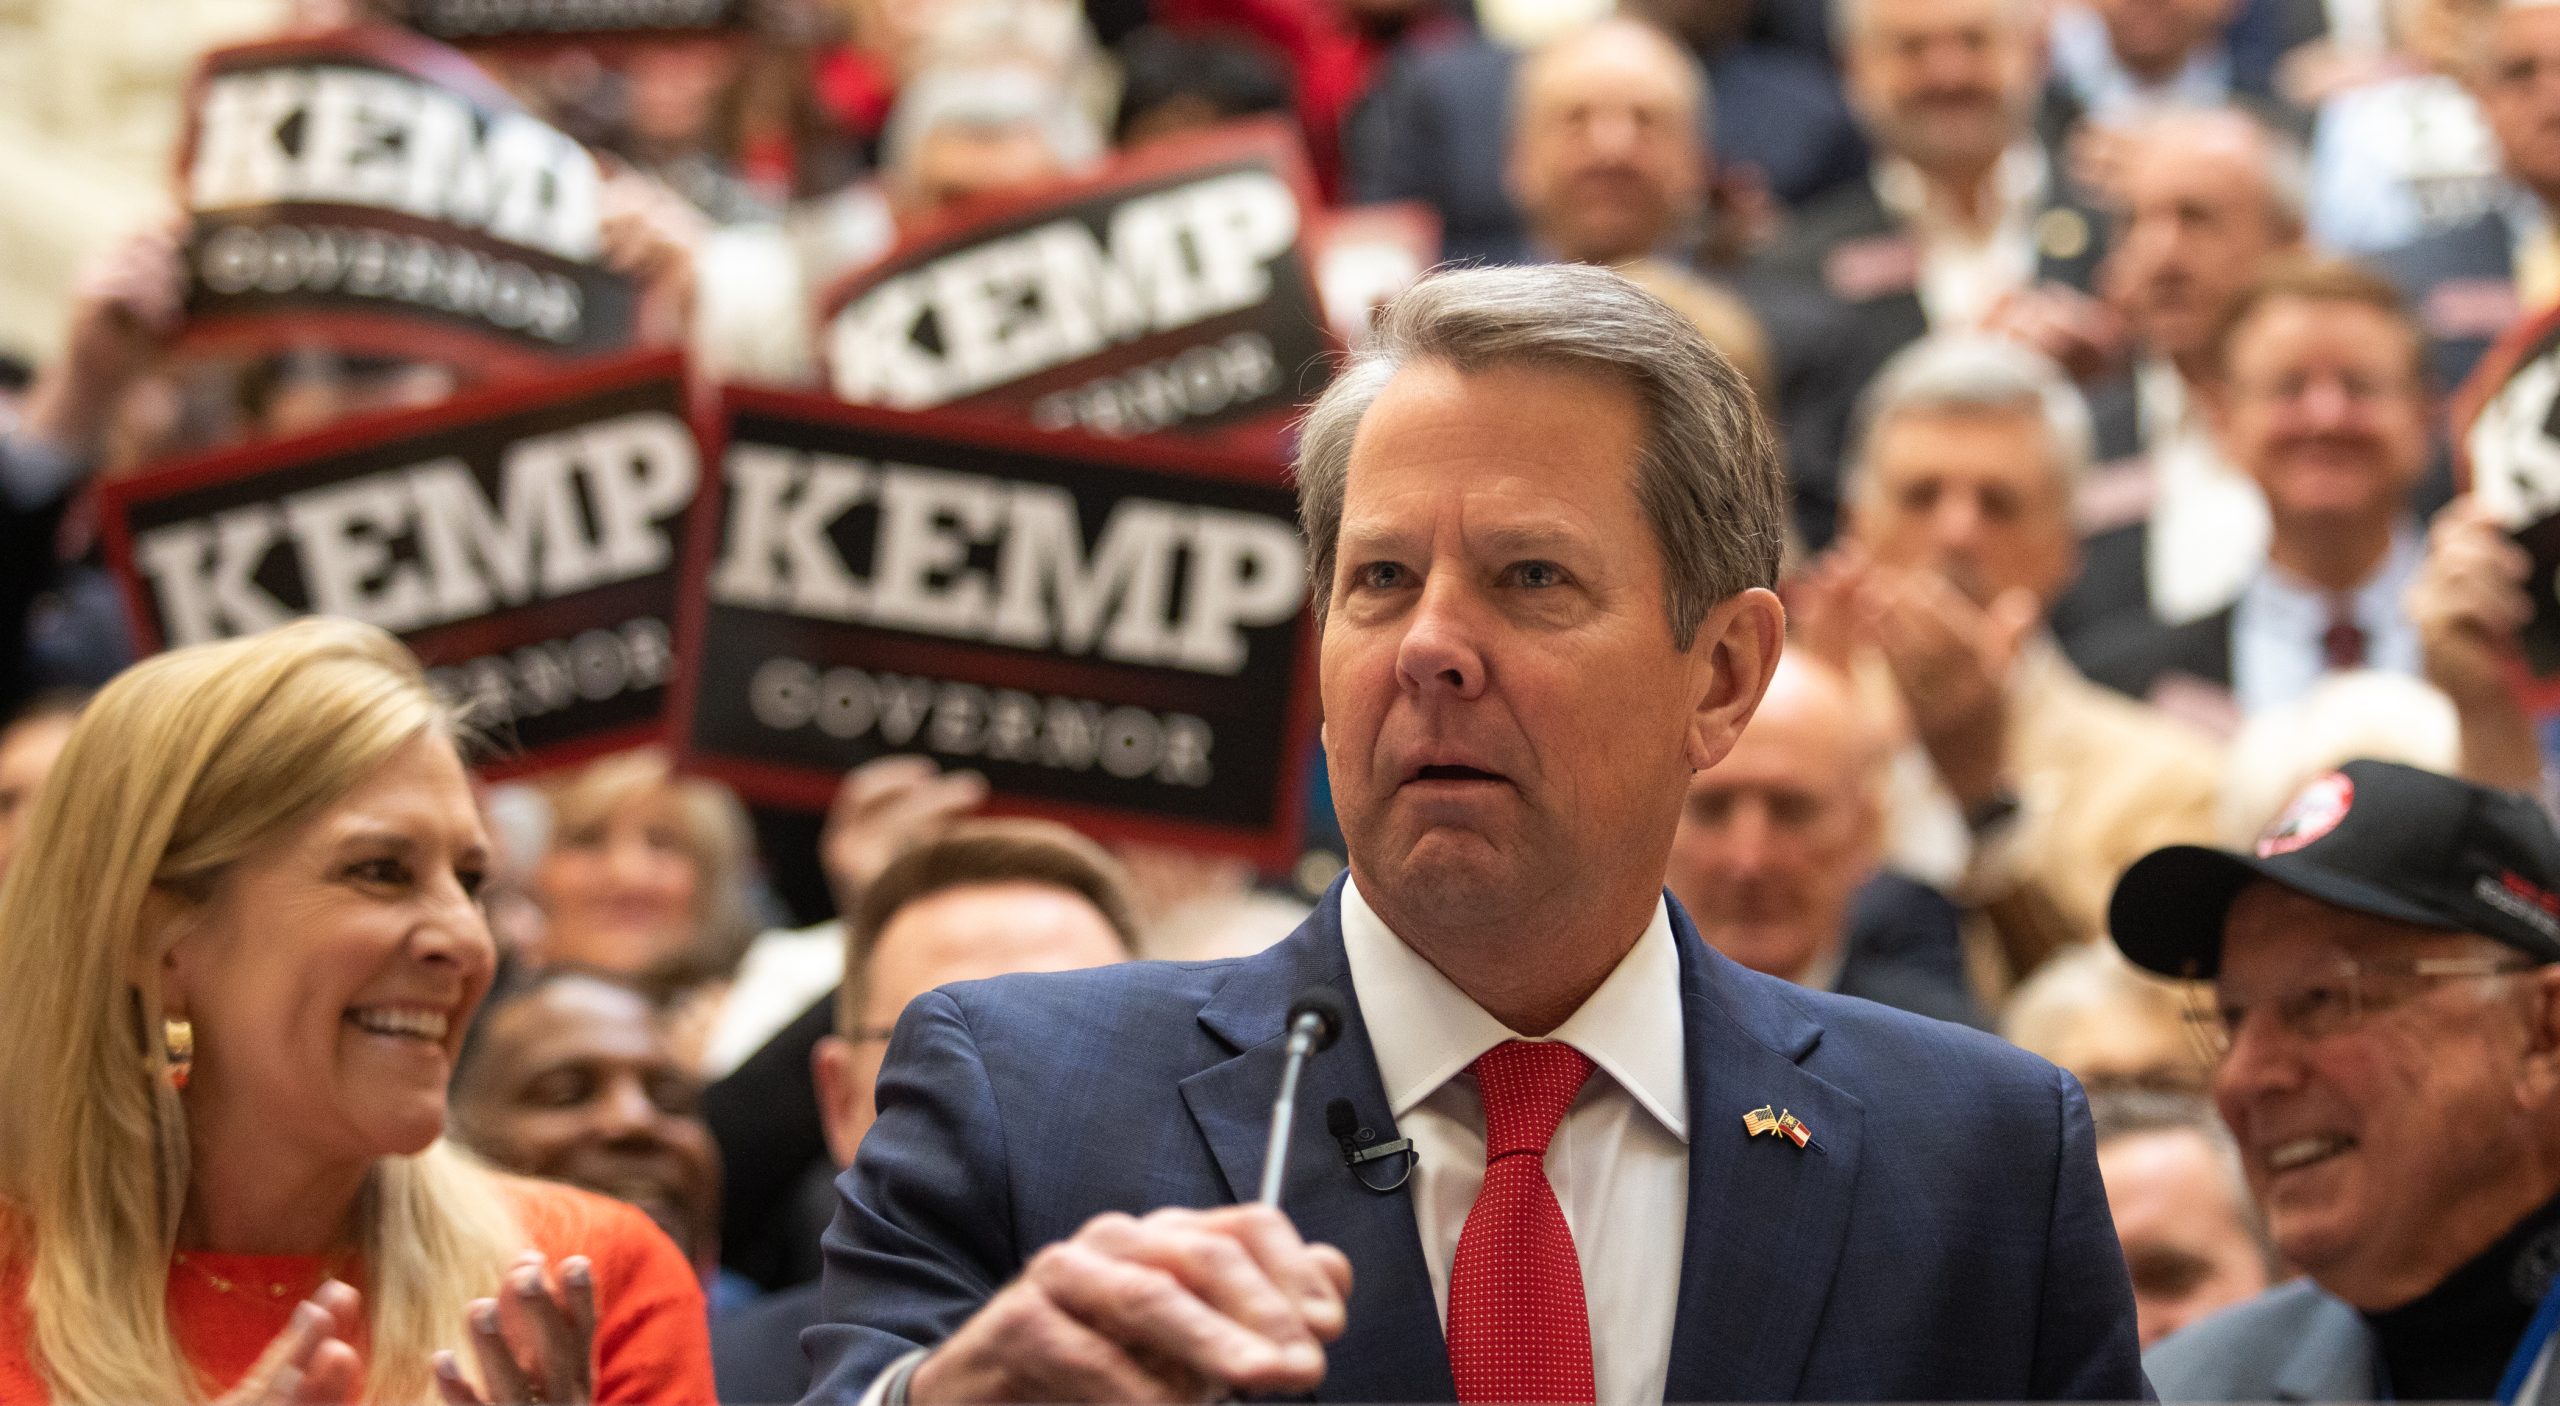 Governor Kemp is confident as he qualifies for reelection campaign